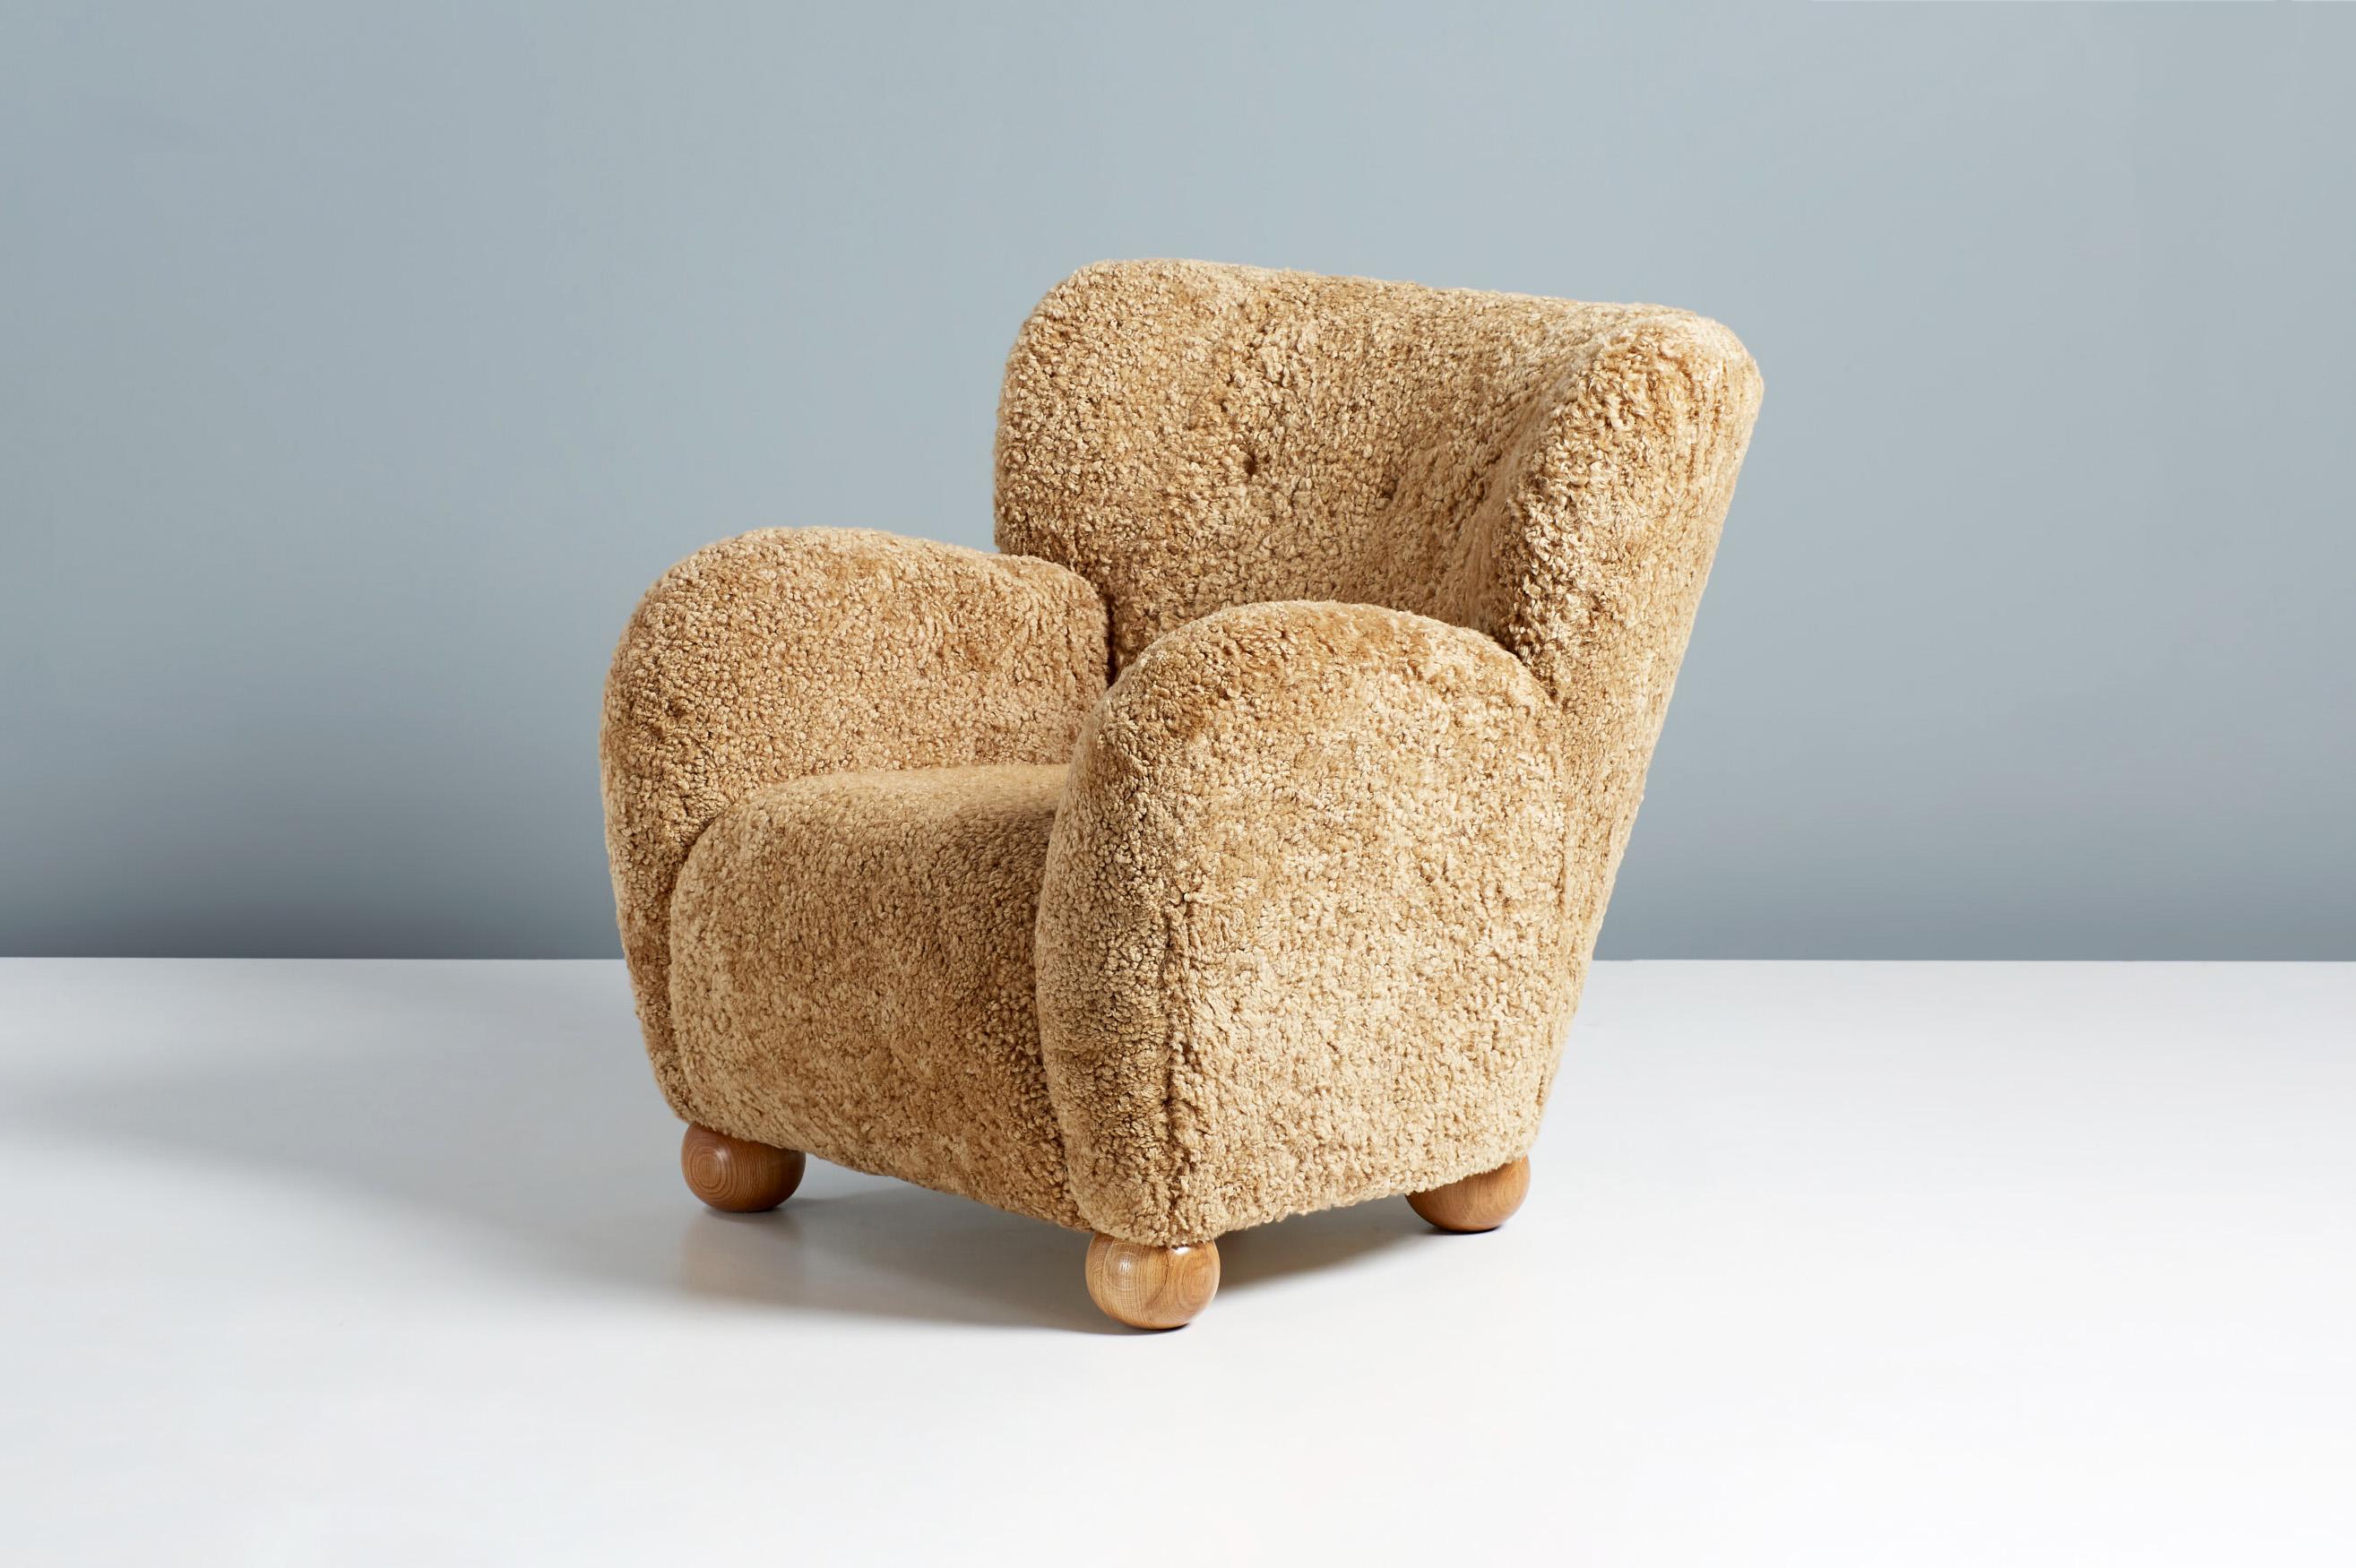 Dagmar design - Karu lounge chair

A pair of custom-made lounge chairs developed & produced at our workshops in London using the highest quality materials. These examples are upholstered in ‘Maple’ shearling with oiled oak ball feet. The Karu